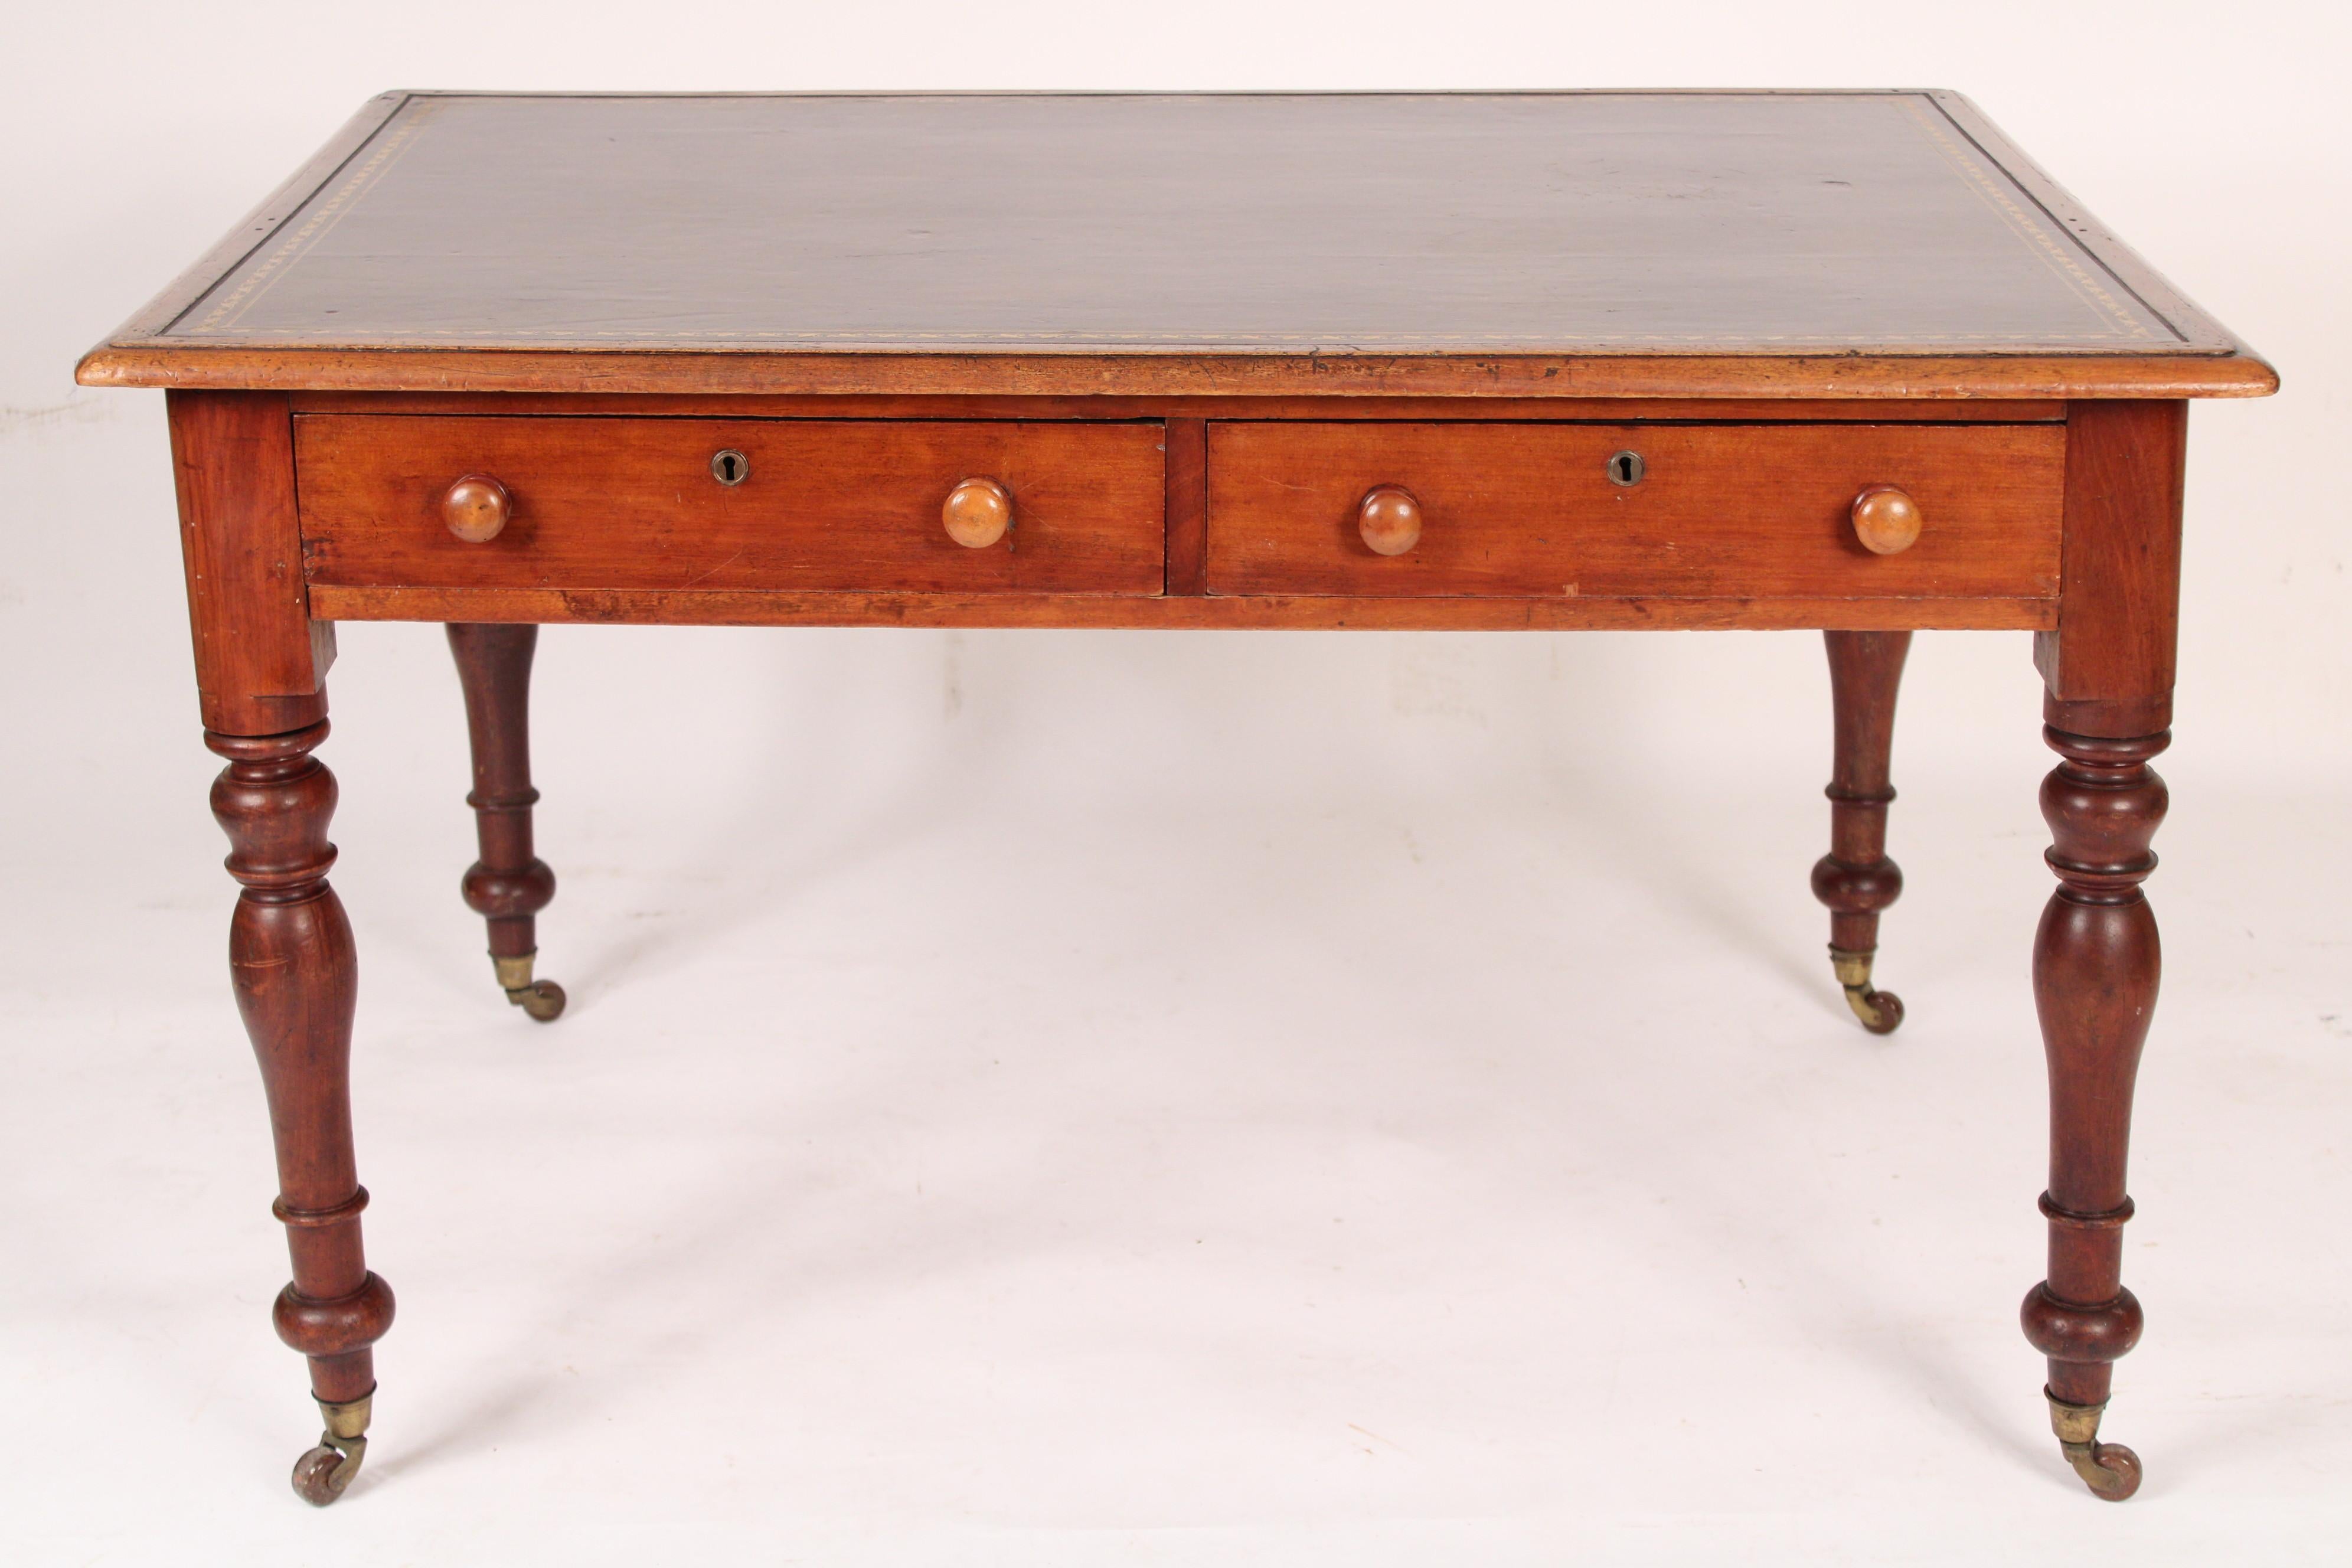 William IV mahogany writing table with a tooled leather top, circa 1835. With a mahogany top inset with a late 20th century tooled leather top, two frieze drawers, turned legs resting on brass casters. Knee clearance 22.5